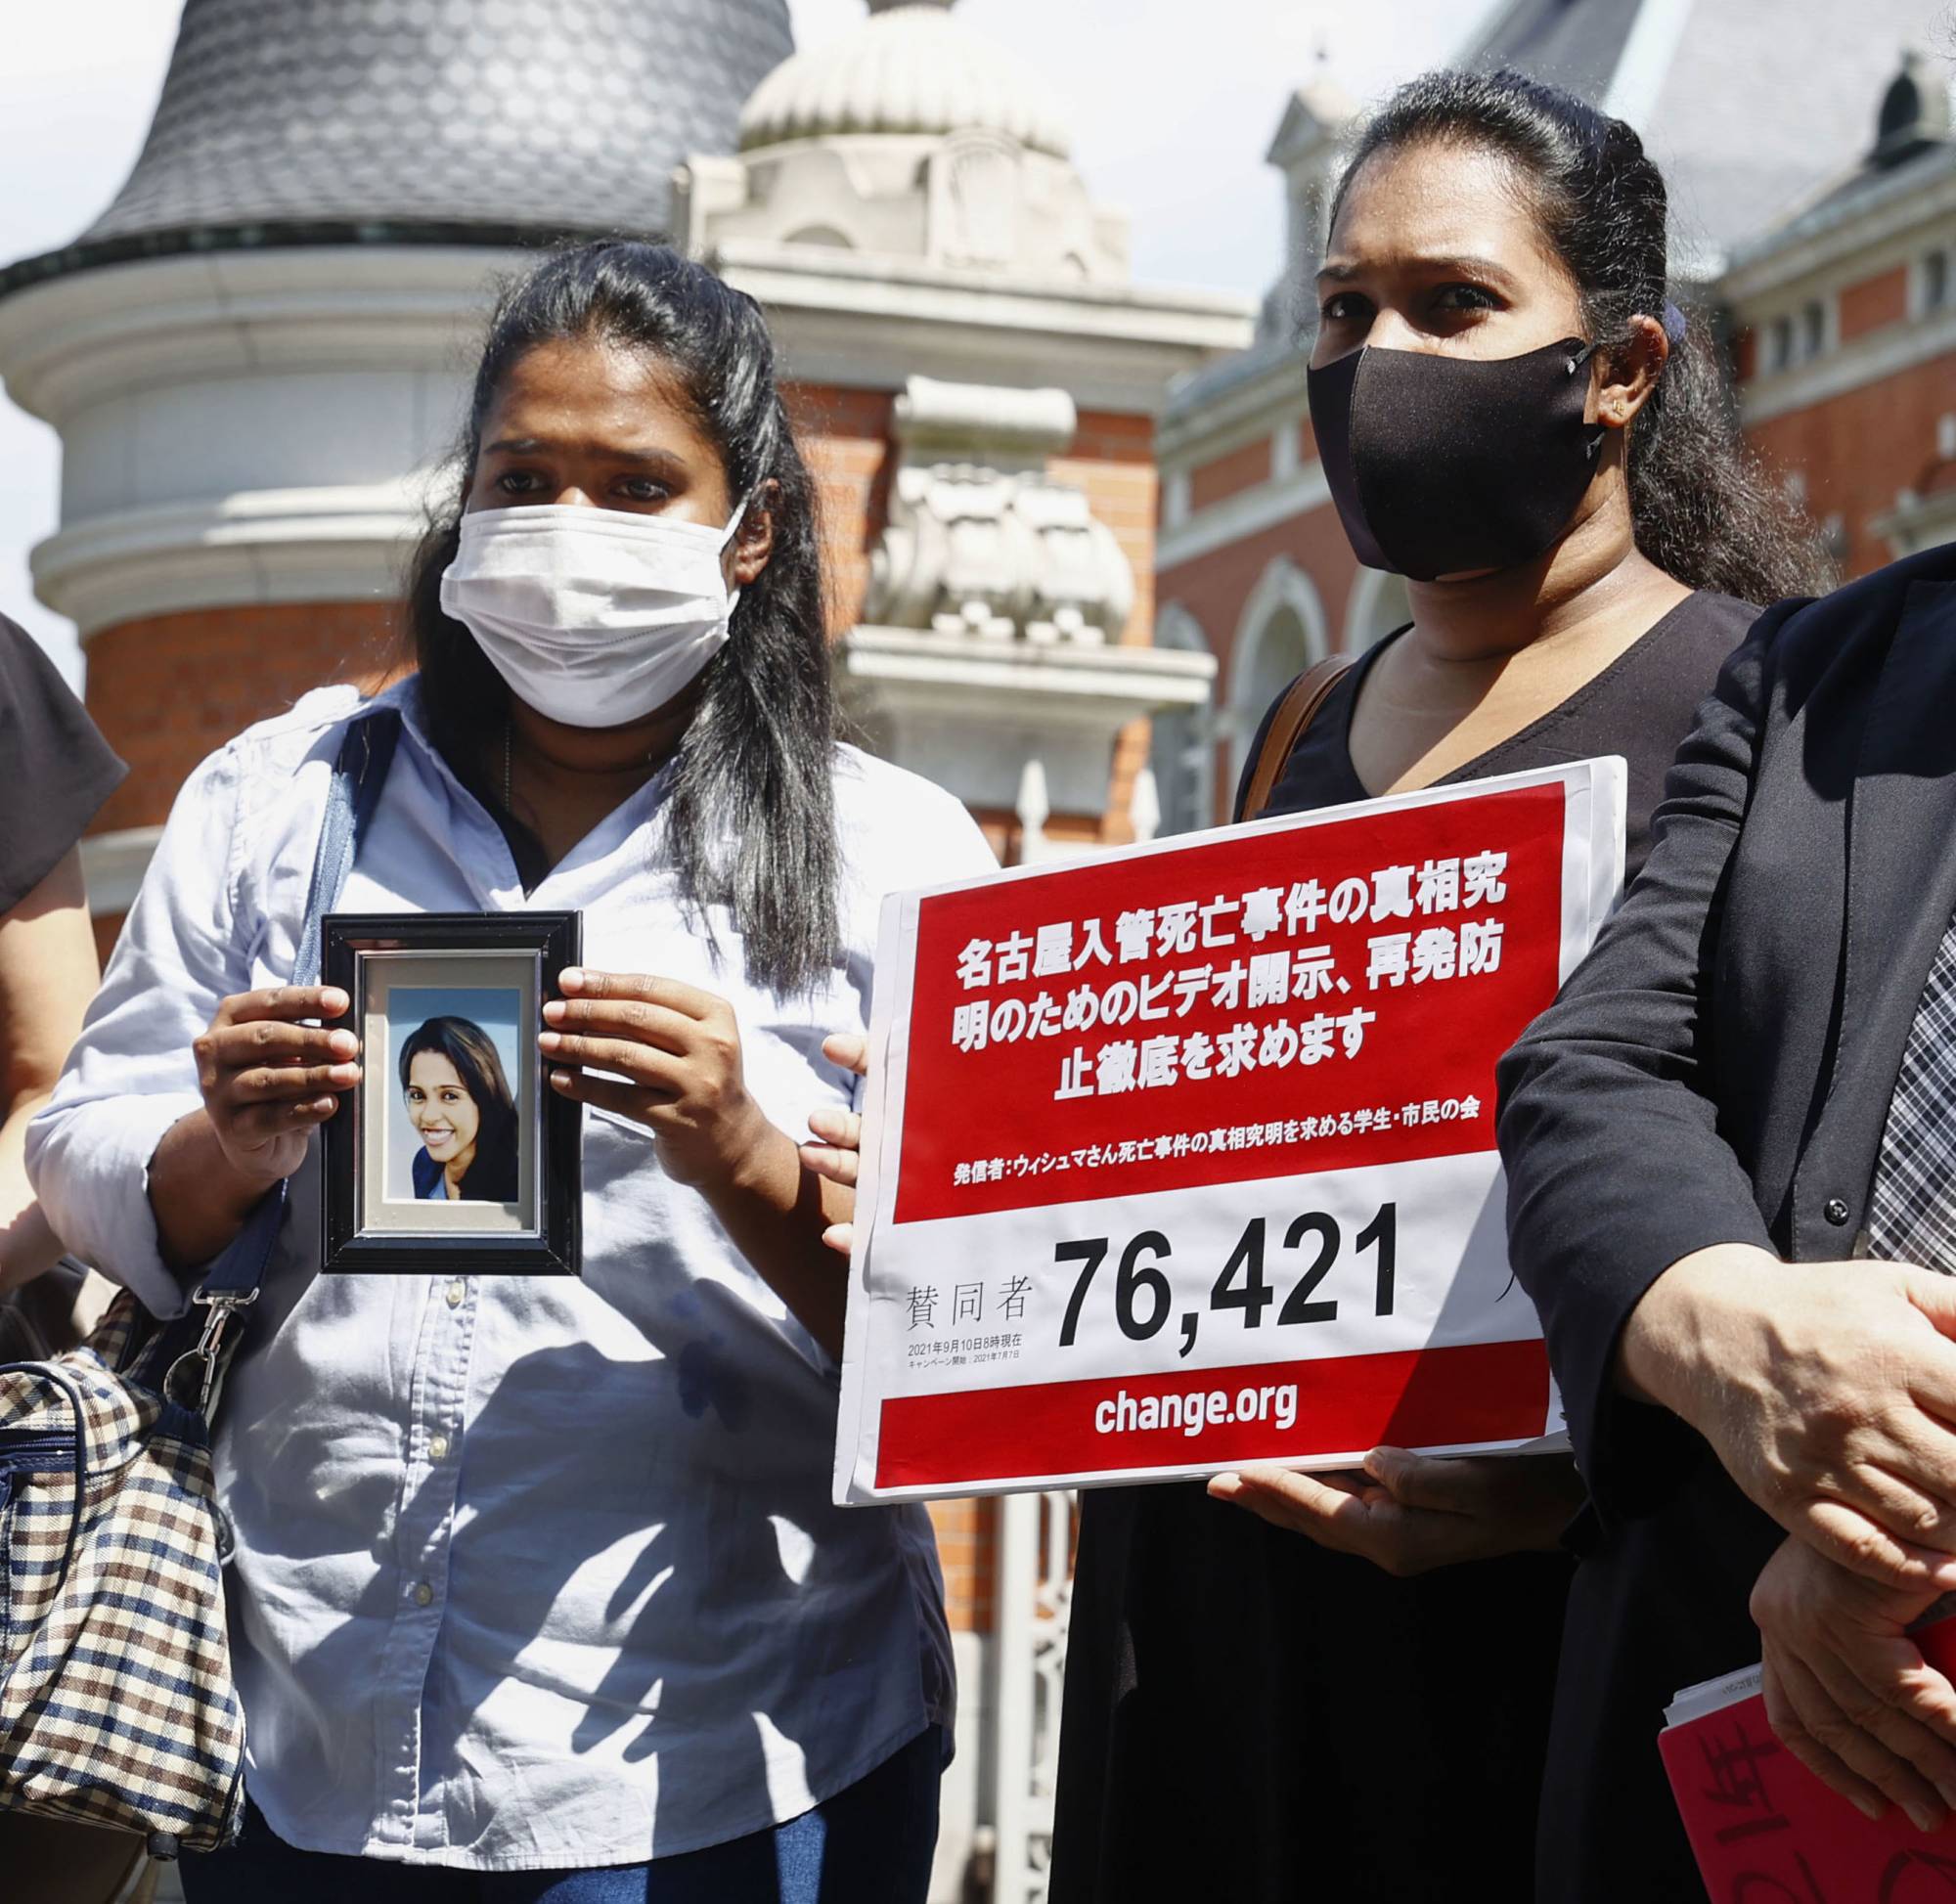 Two sisters of Ratnayake Liyanage Wishma Sandamali, a Sri Lankan woman who died in March 2021 at a Japanese immigration center, speak to reporters in Tokyo last September. | KYODO